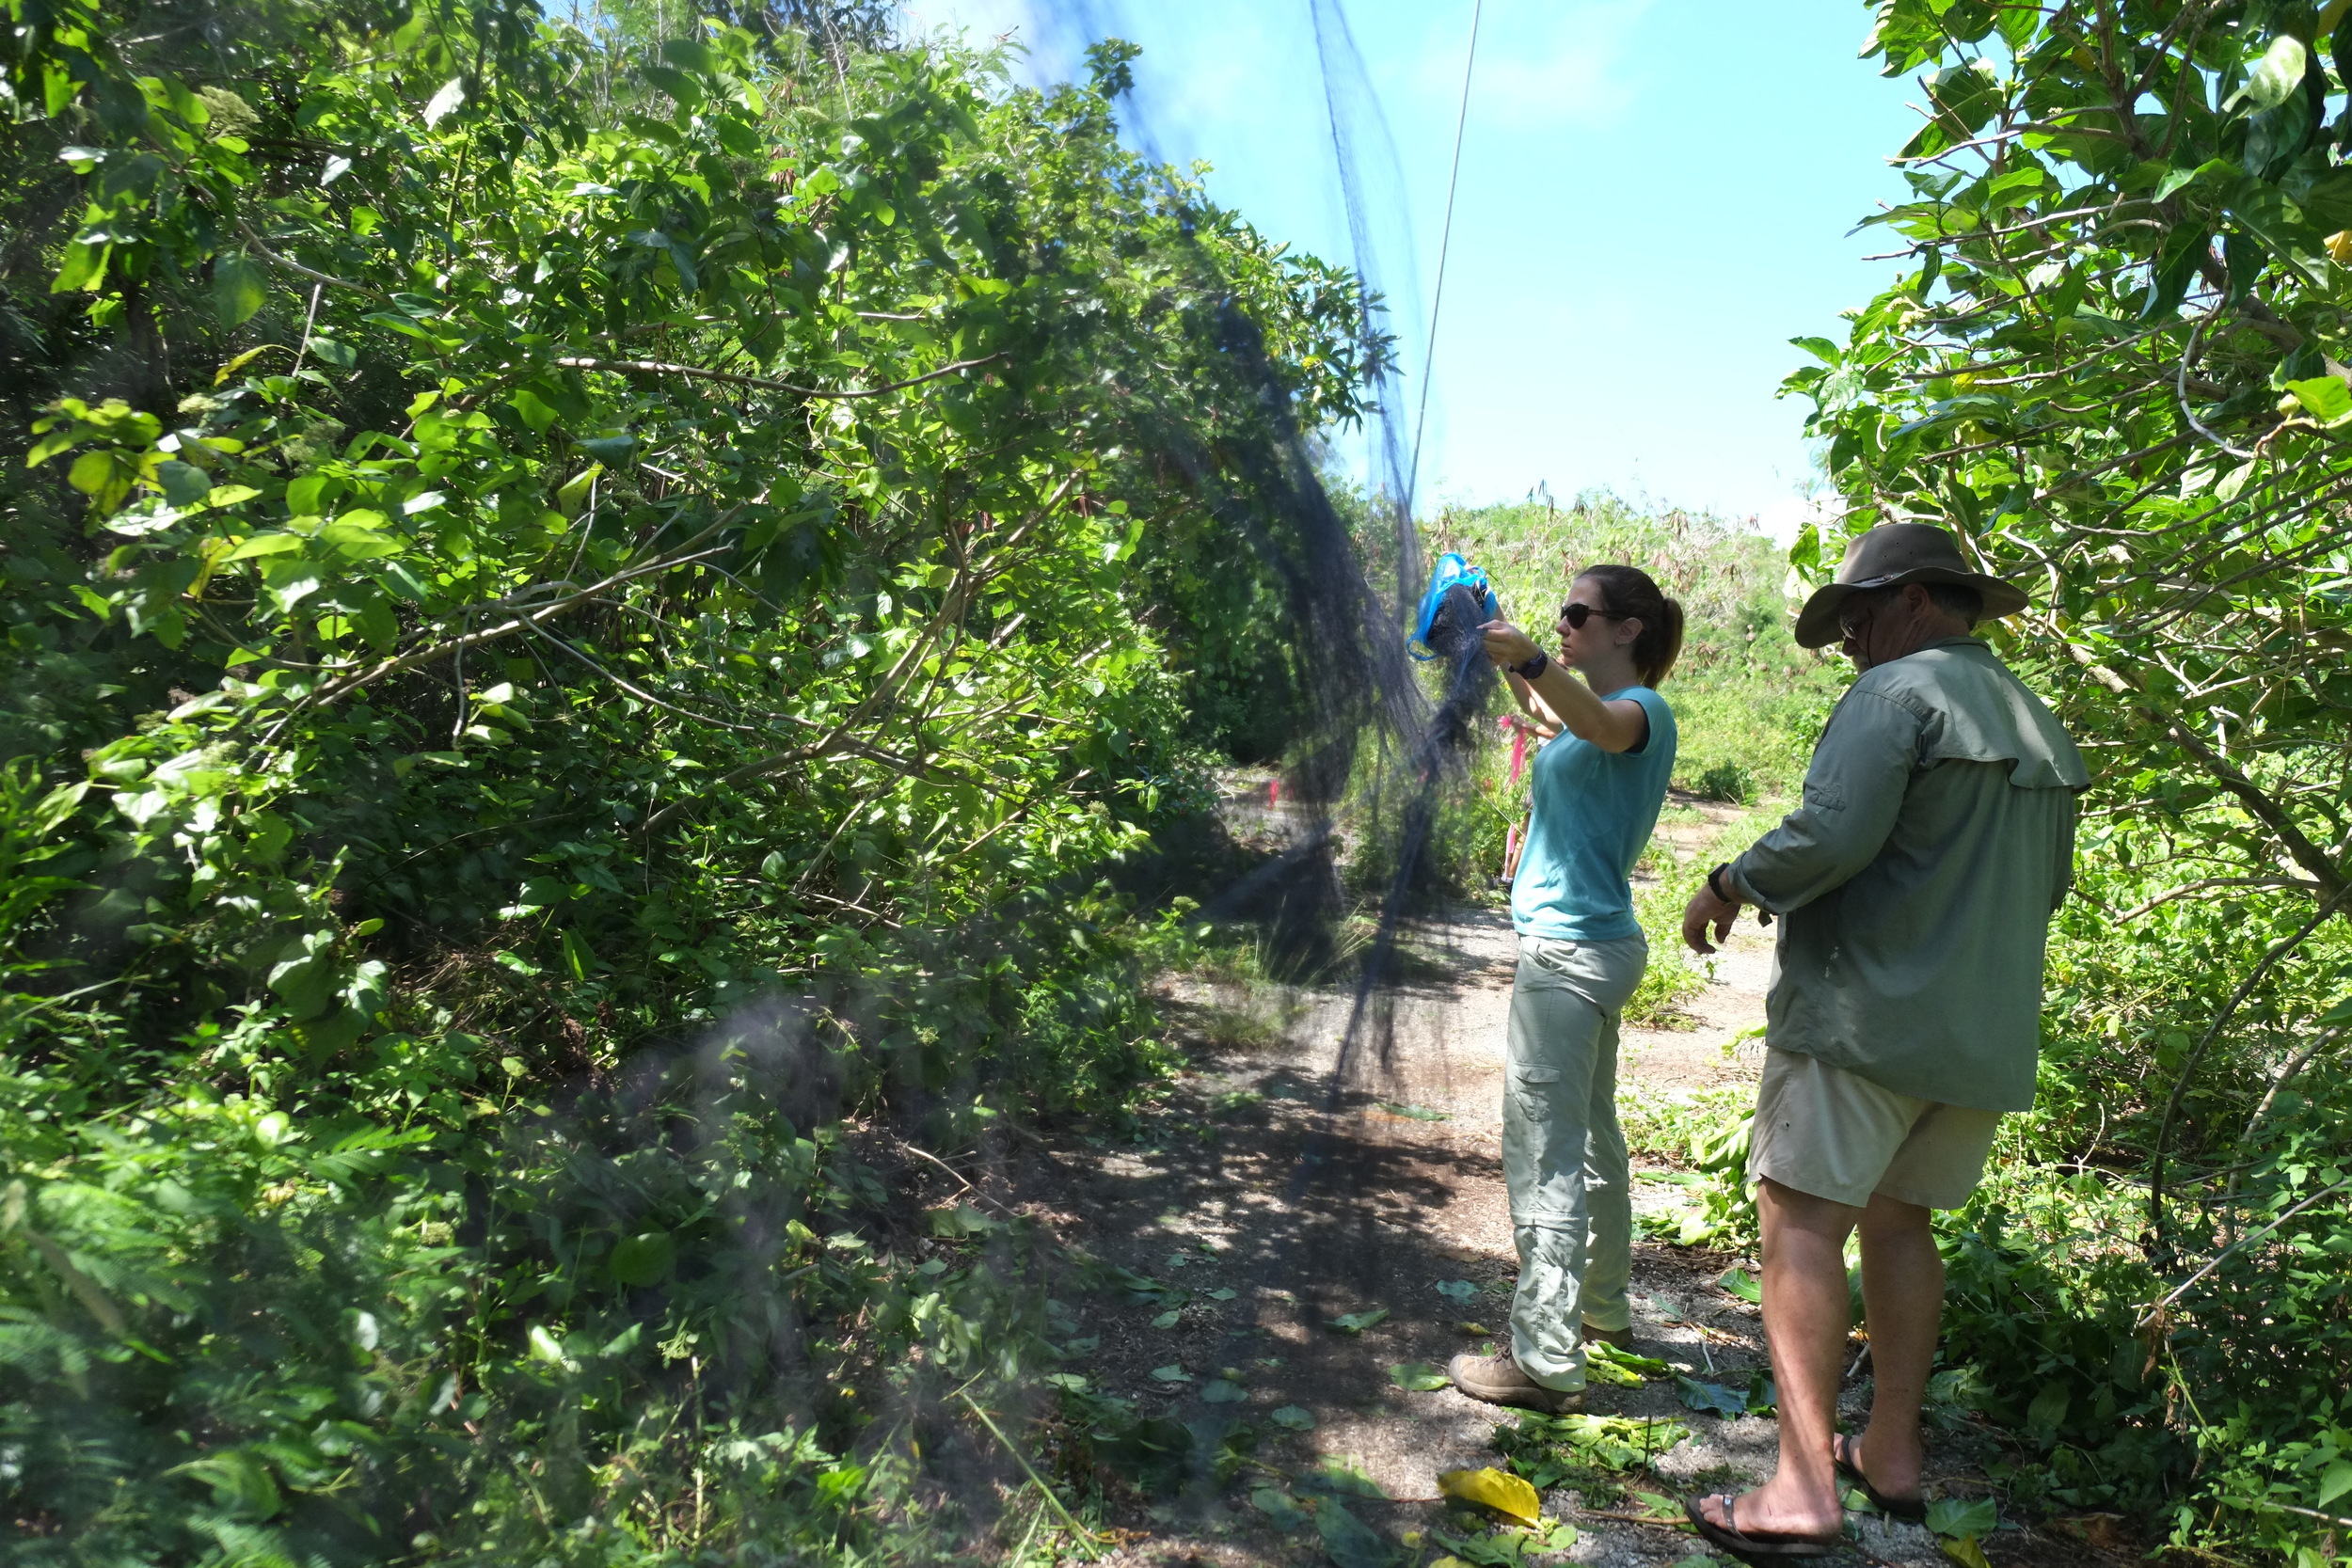  Kelly (bird curator at the Honolulu Zoo) and Peter (co-founder of Pacific Bird Conservation) set up mist nets 